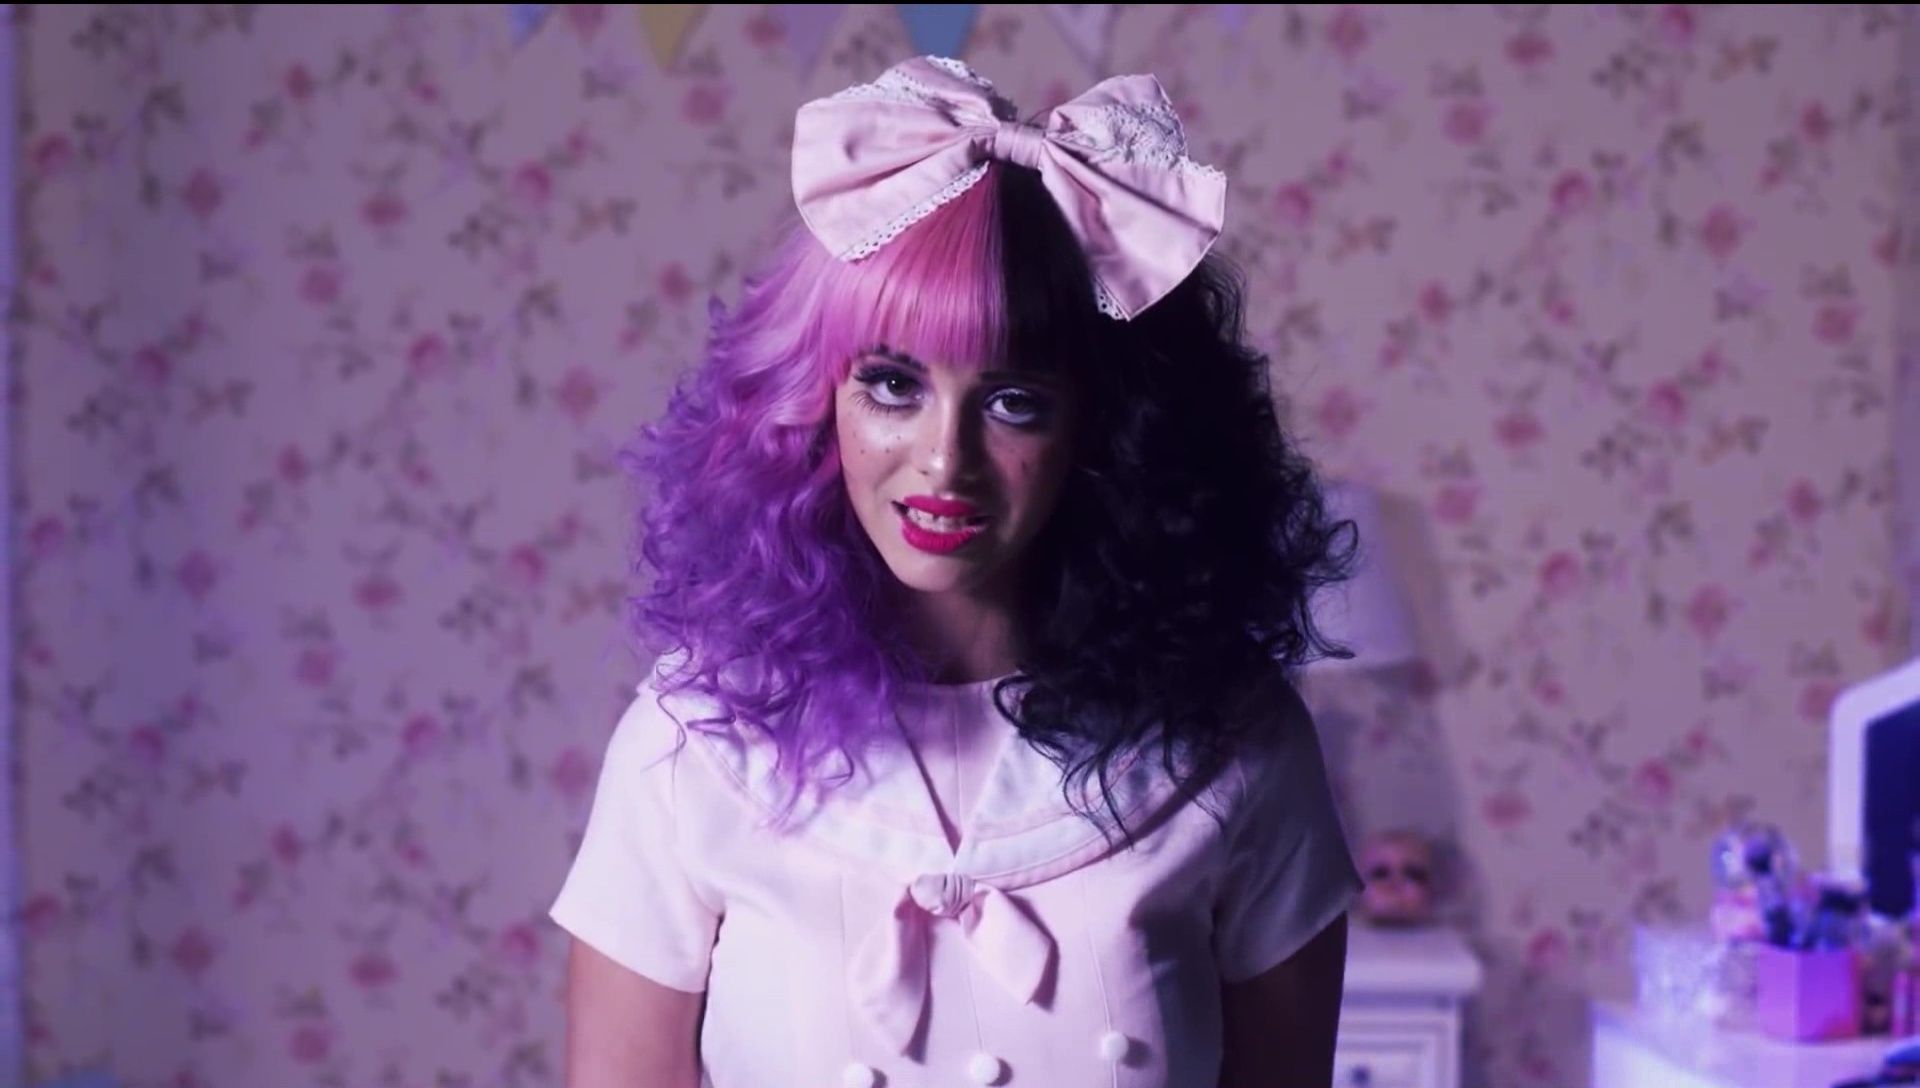 A woman with pink hair and a pink bow in her hair. - Melanie Martinez